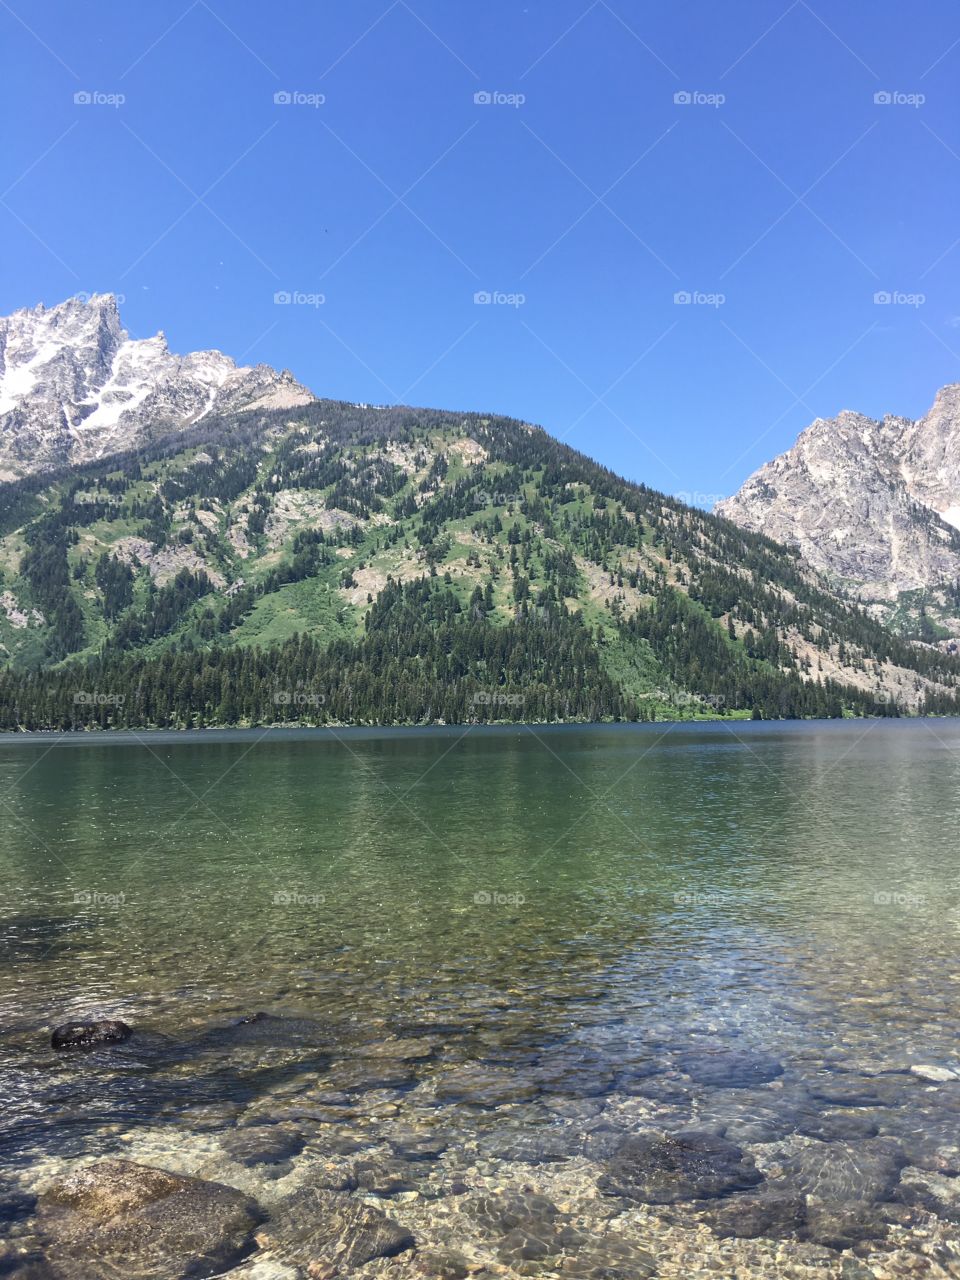 Mountains and water